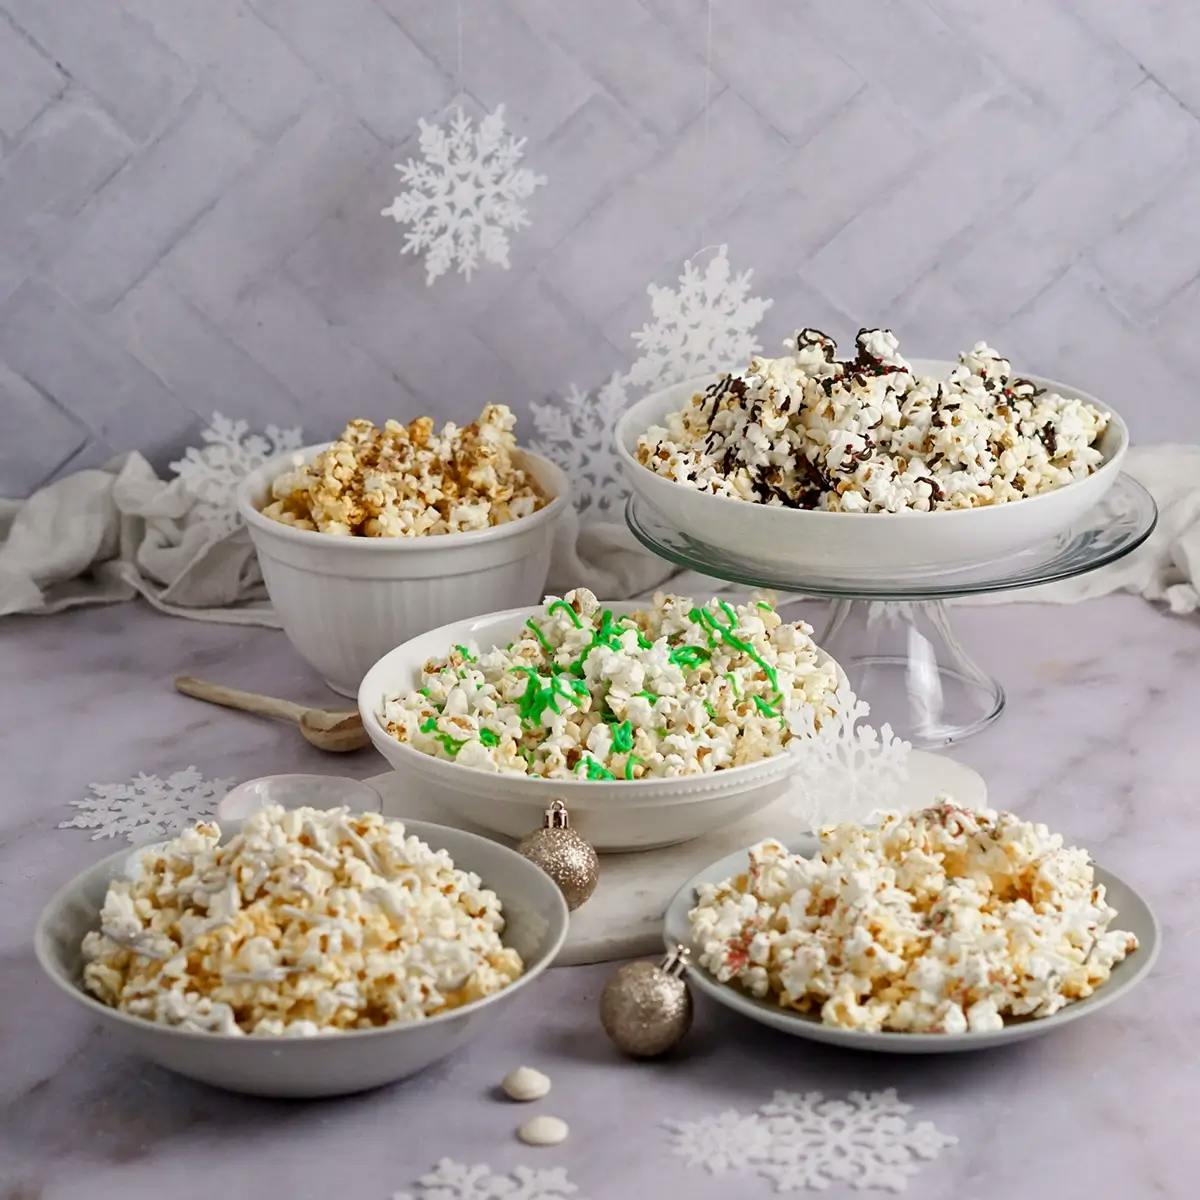 Five bowls of christmas popcorn drizzled with chocolate, peppermint, and other holiday toppings.